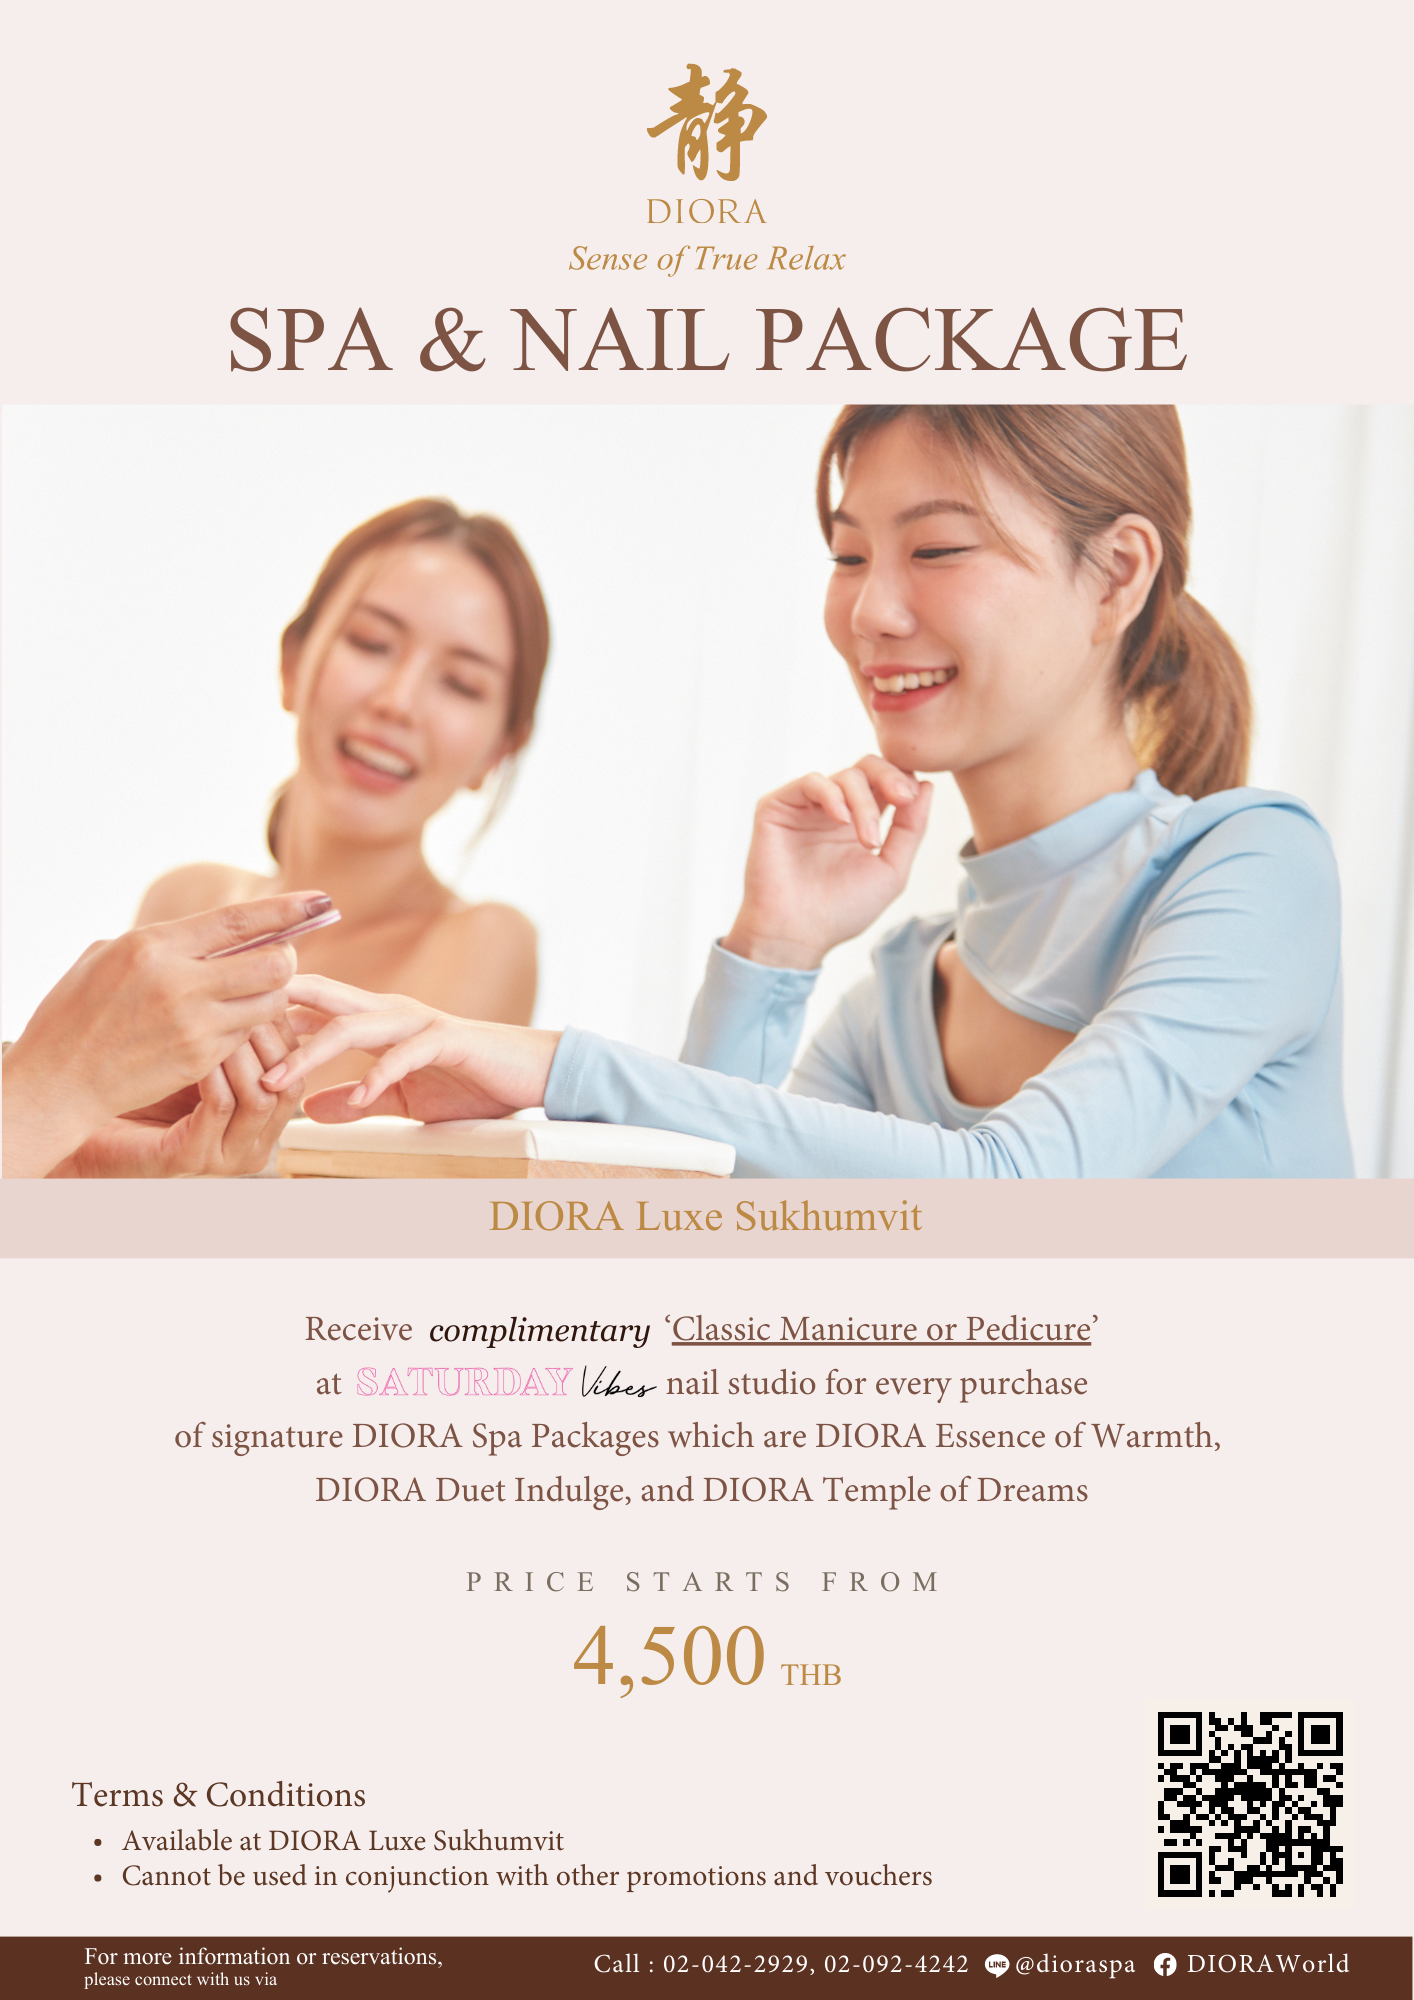 SPA & NAIL Package (DIORA Luxe Sukhumvit)